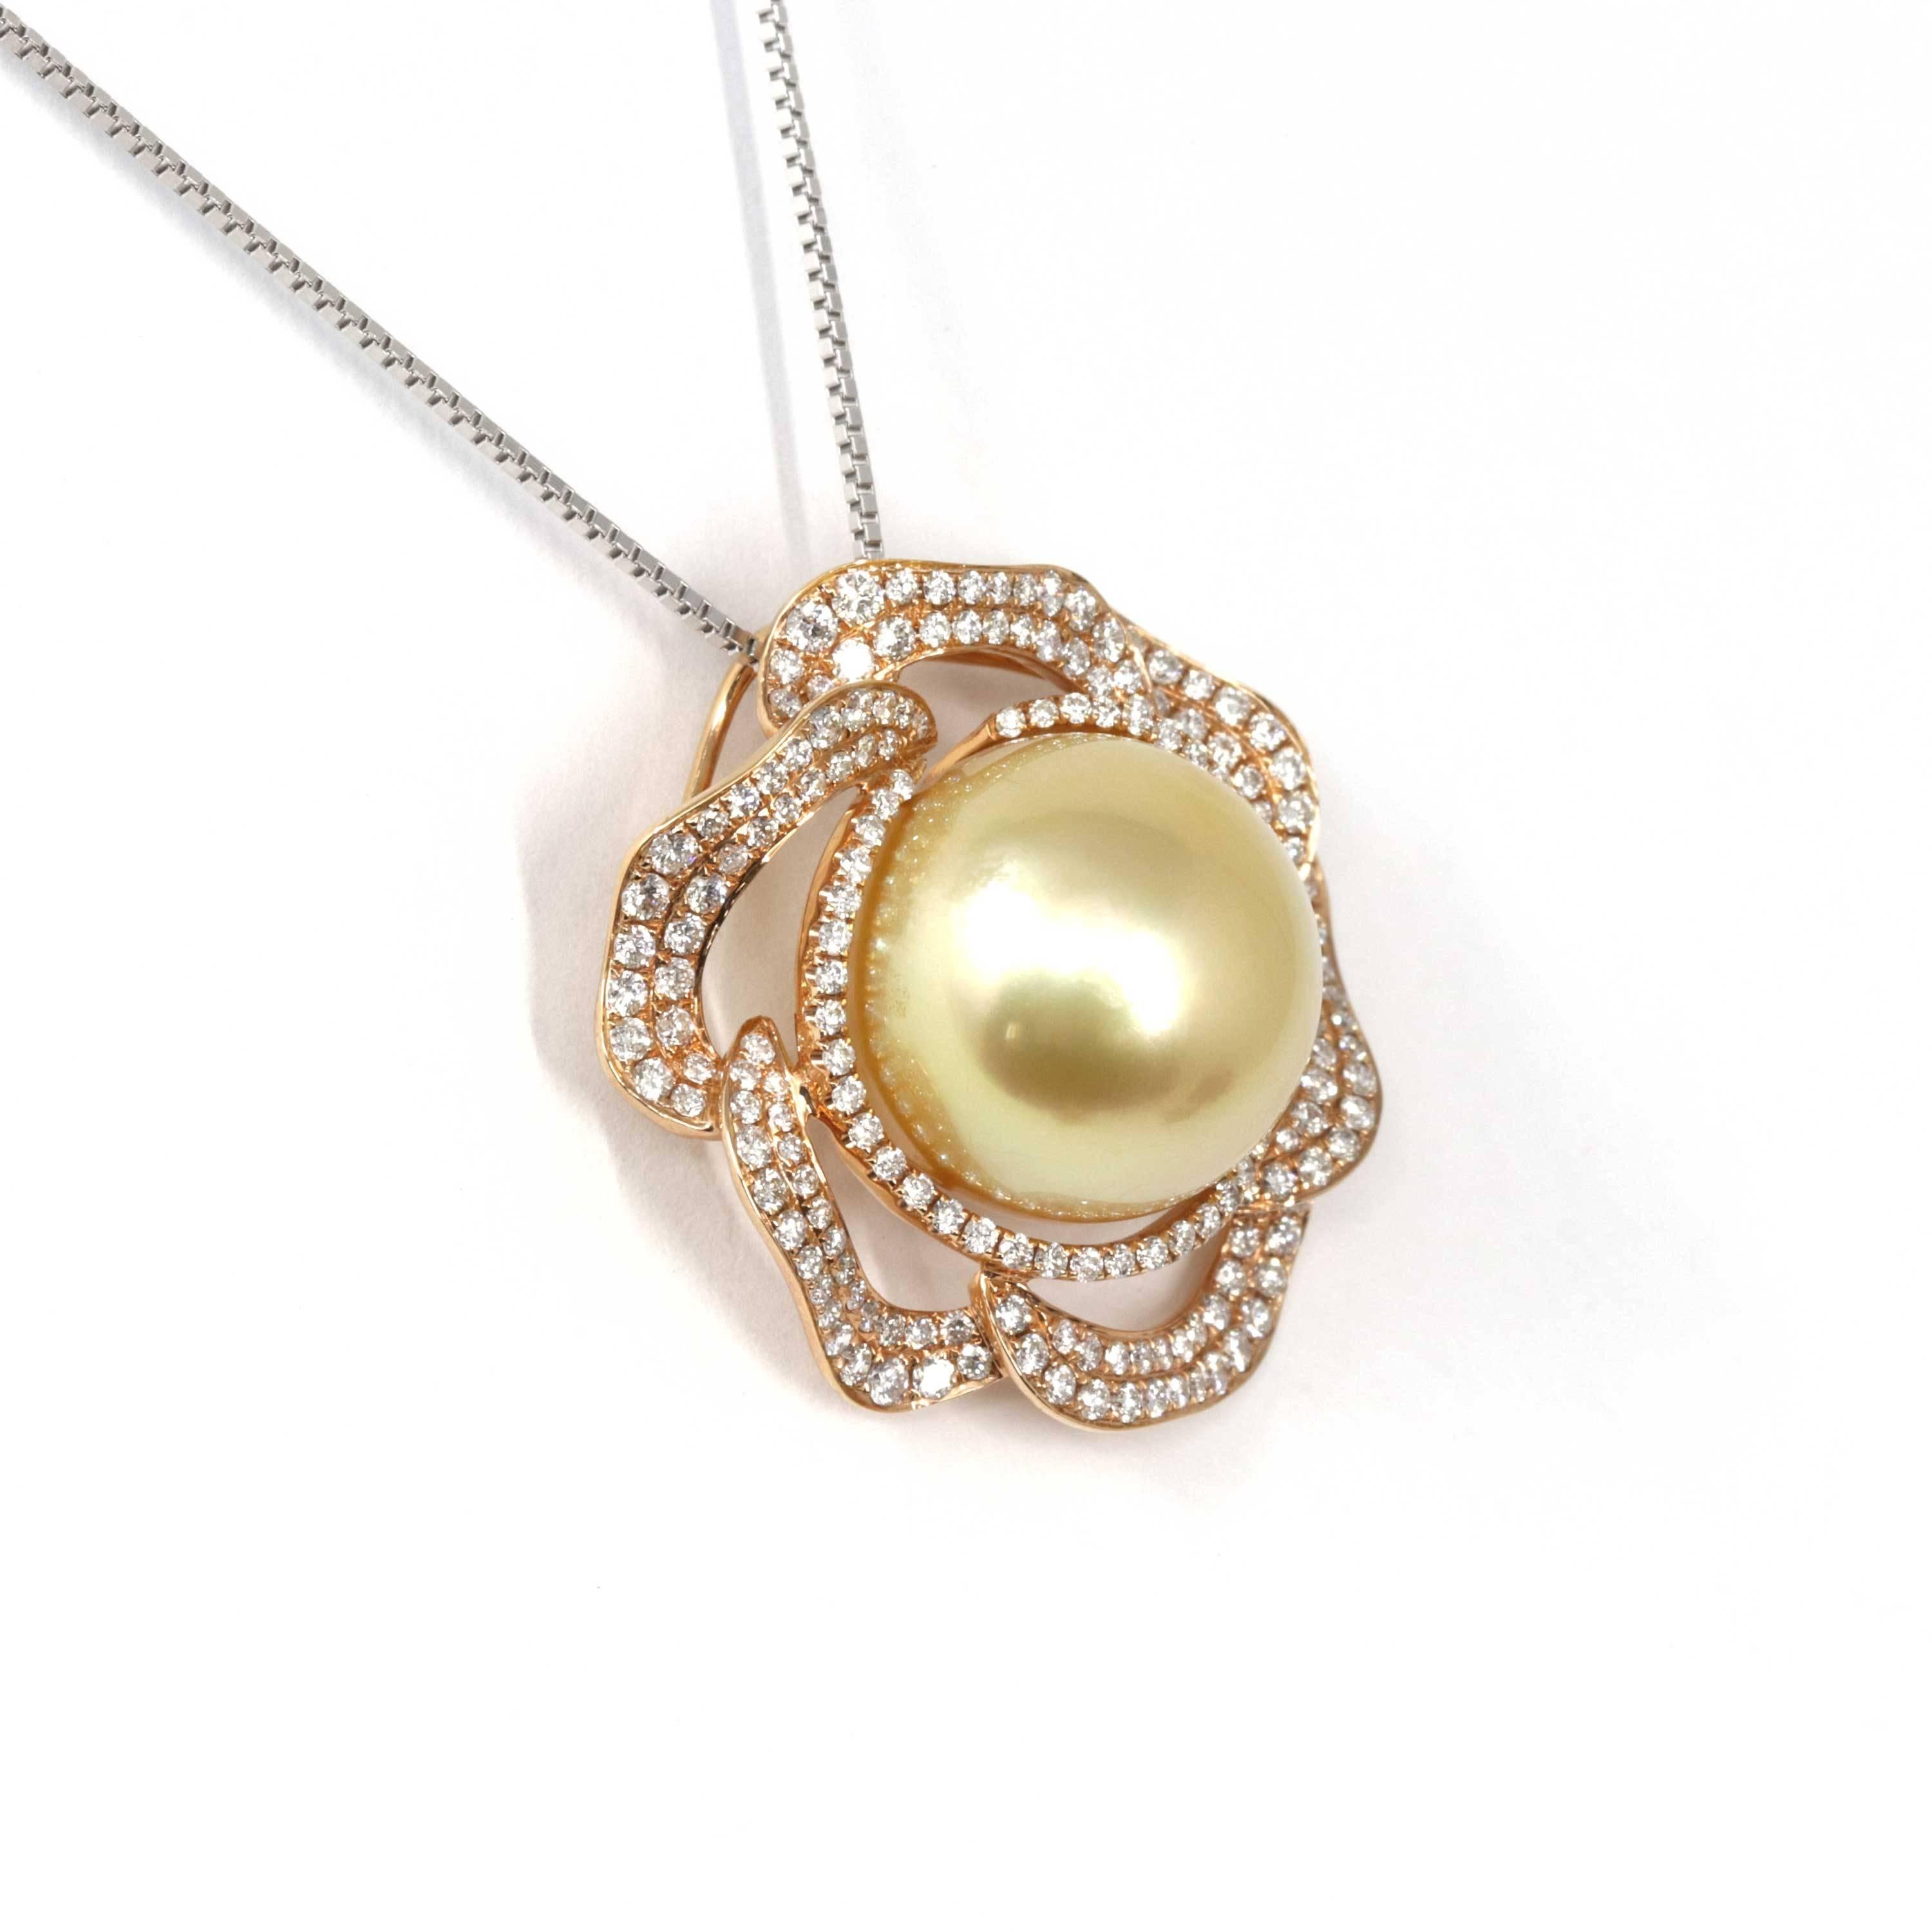 Artist High-End 18k Gold Round, Golden South Sea Cultured Pearl & Diamond Pendant For Sale